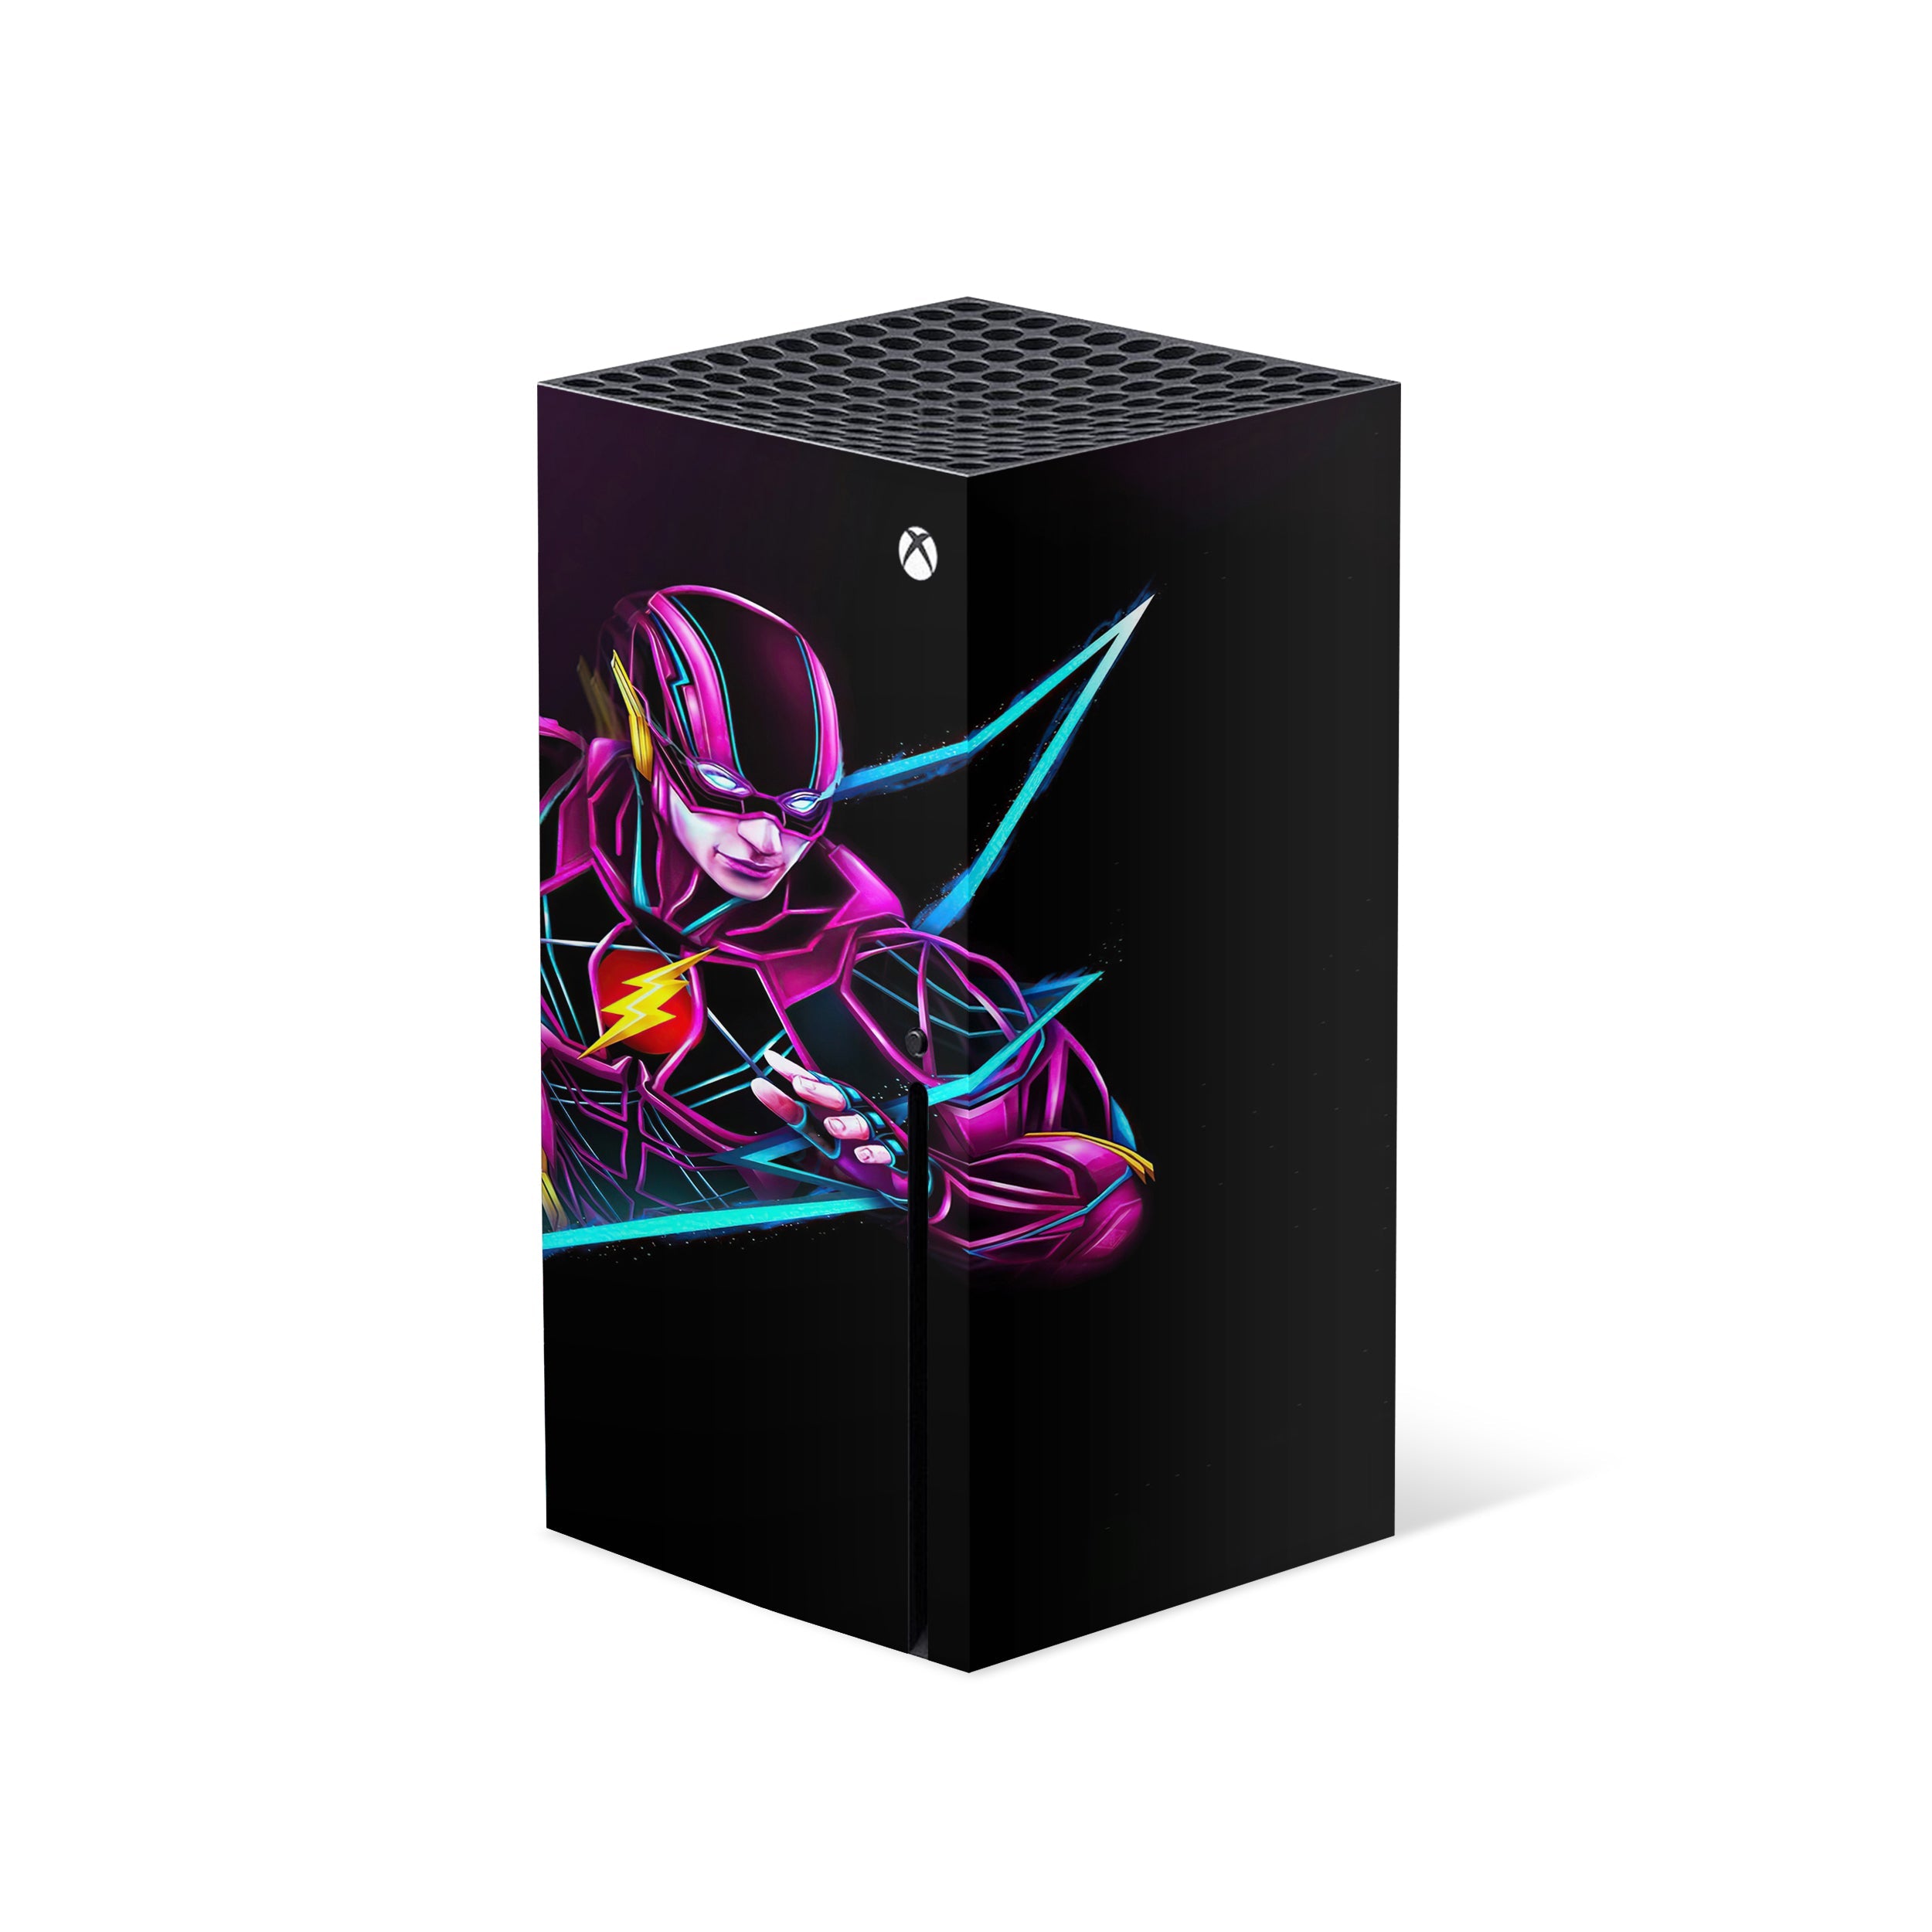 A video game skin featuring a DC Comics Flash design for the Xbox Series X.